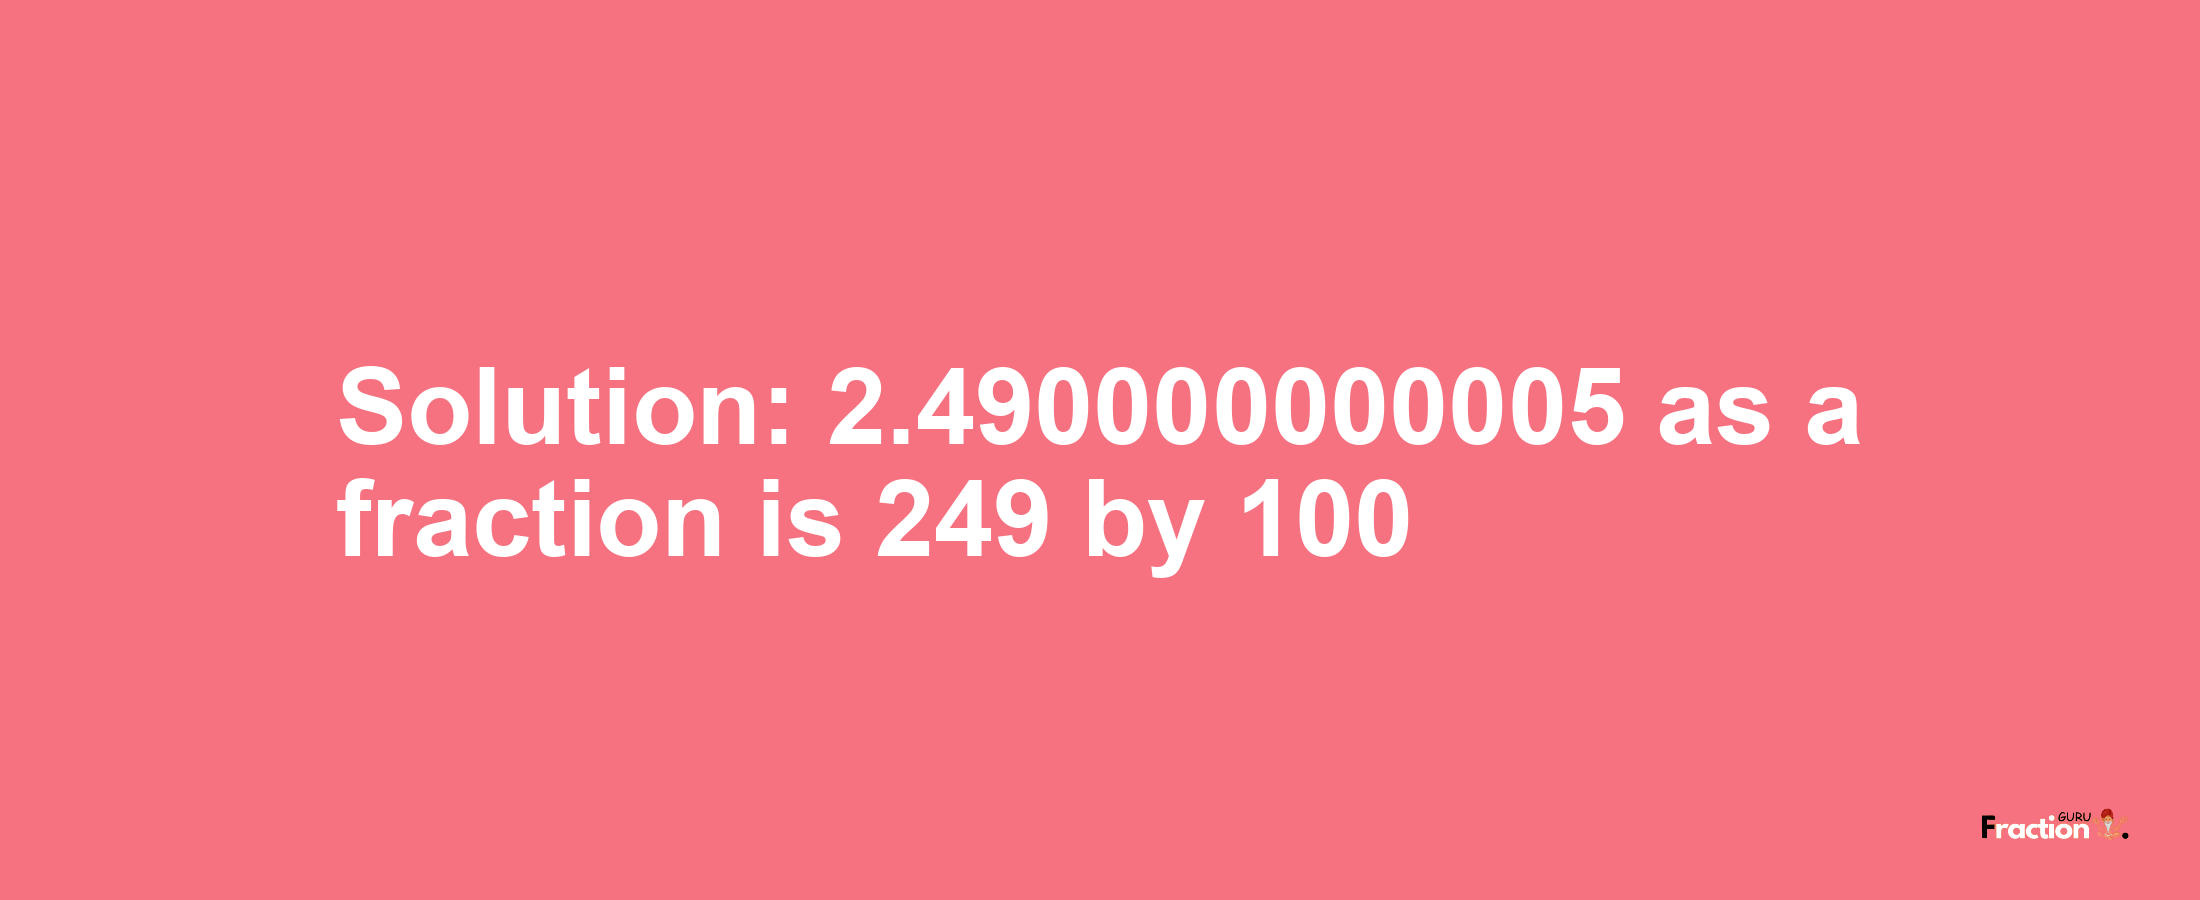 Solution:2.490000000005 as a fraction is 249/100